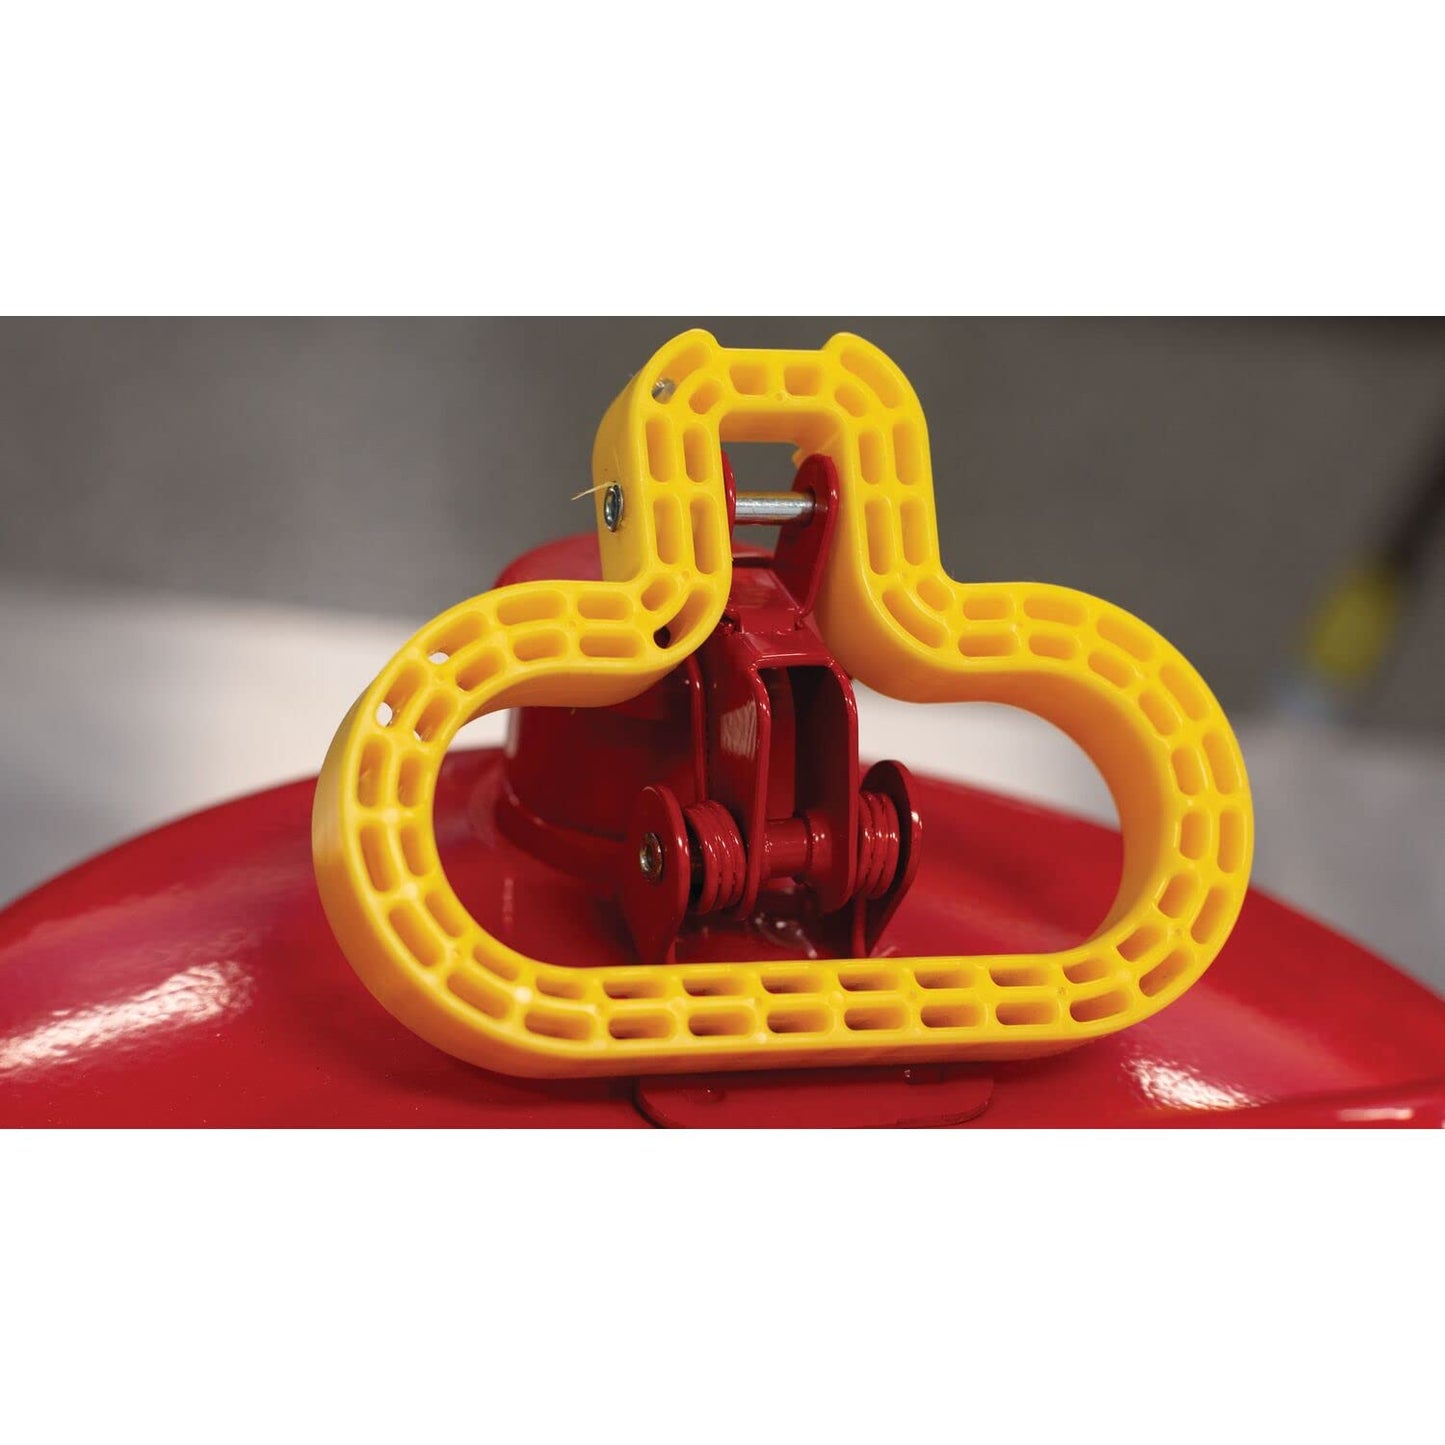 UI-50-FS Red Galvanized Steel Type I Gasoline Safety Can with Funnel, 5 Gallon Capacity, 13.5" Height, 12.5" Diameter,Red/Yellow